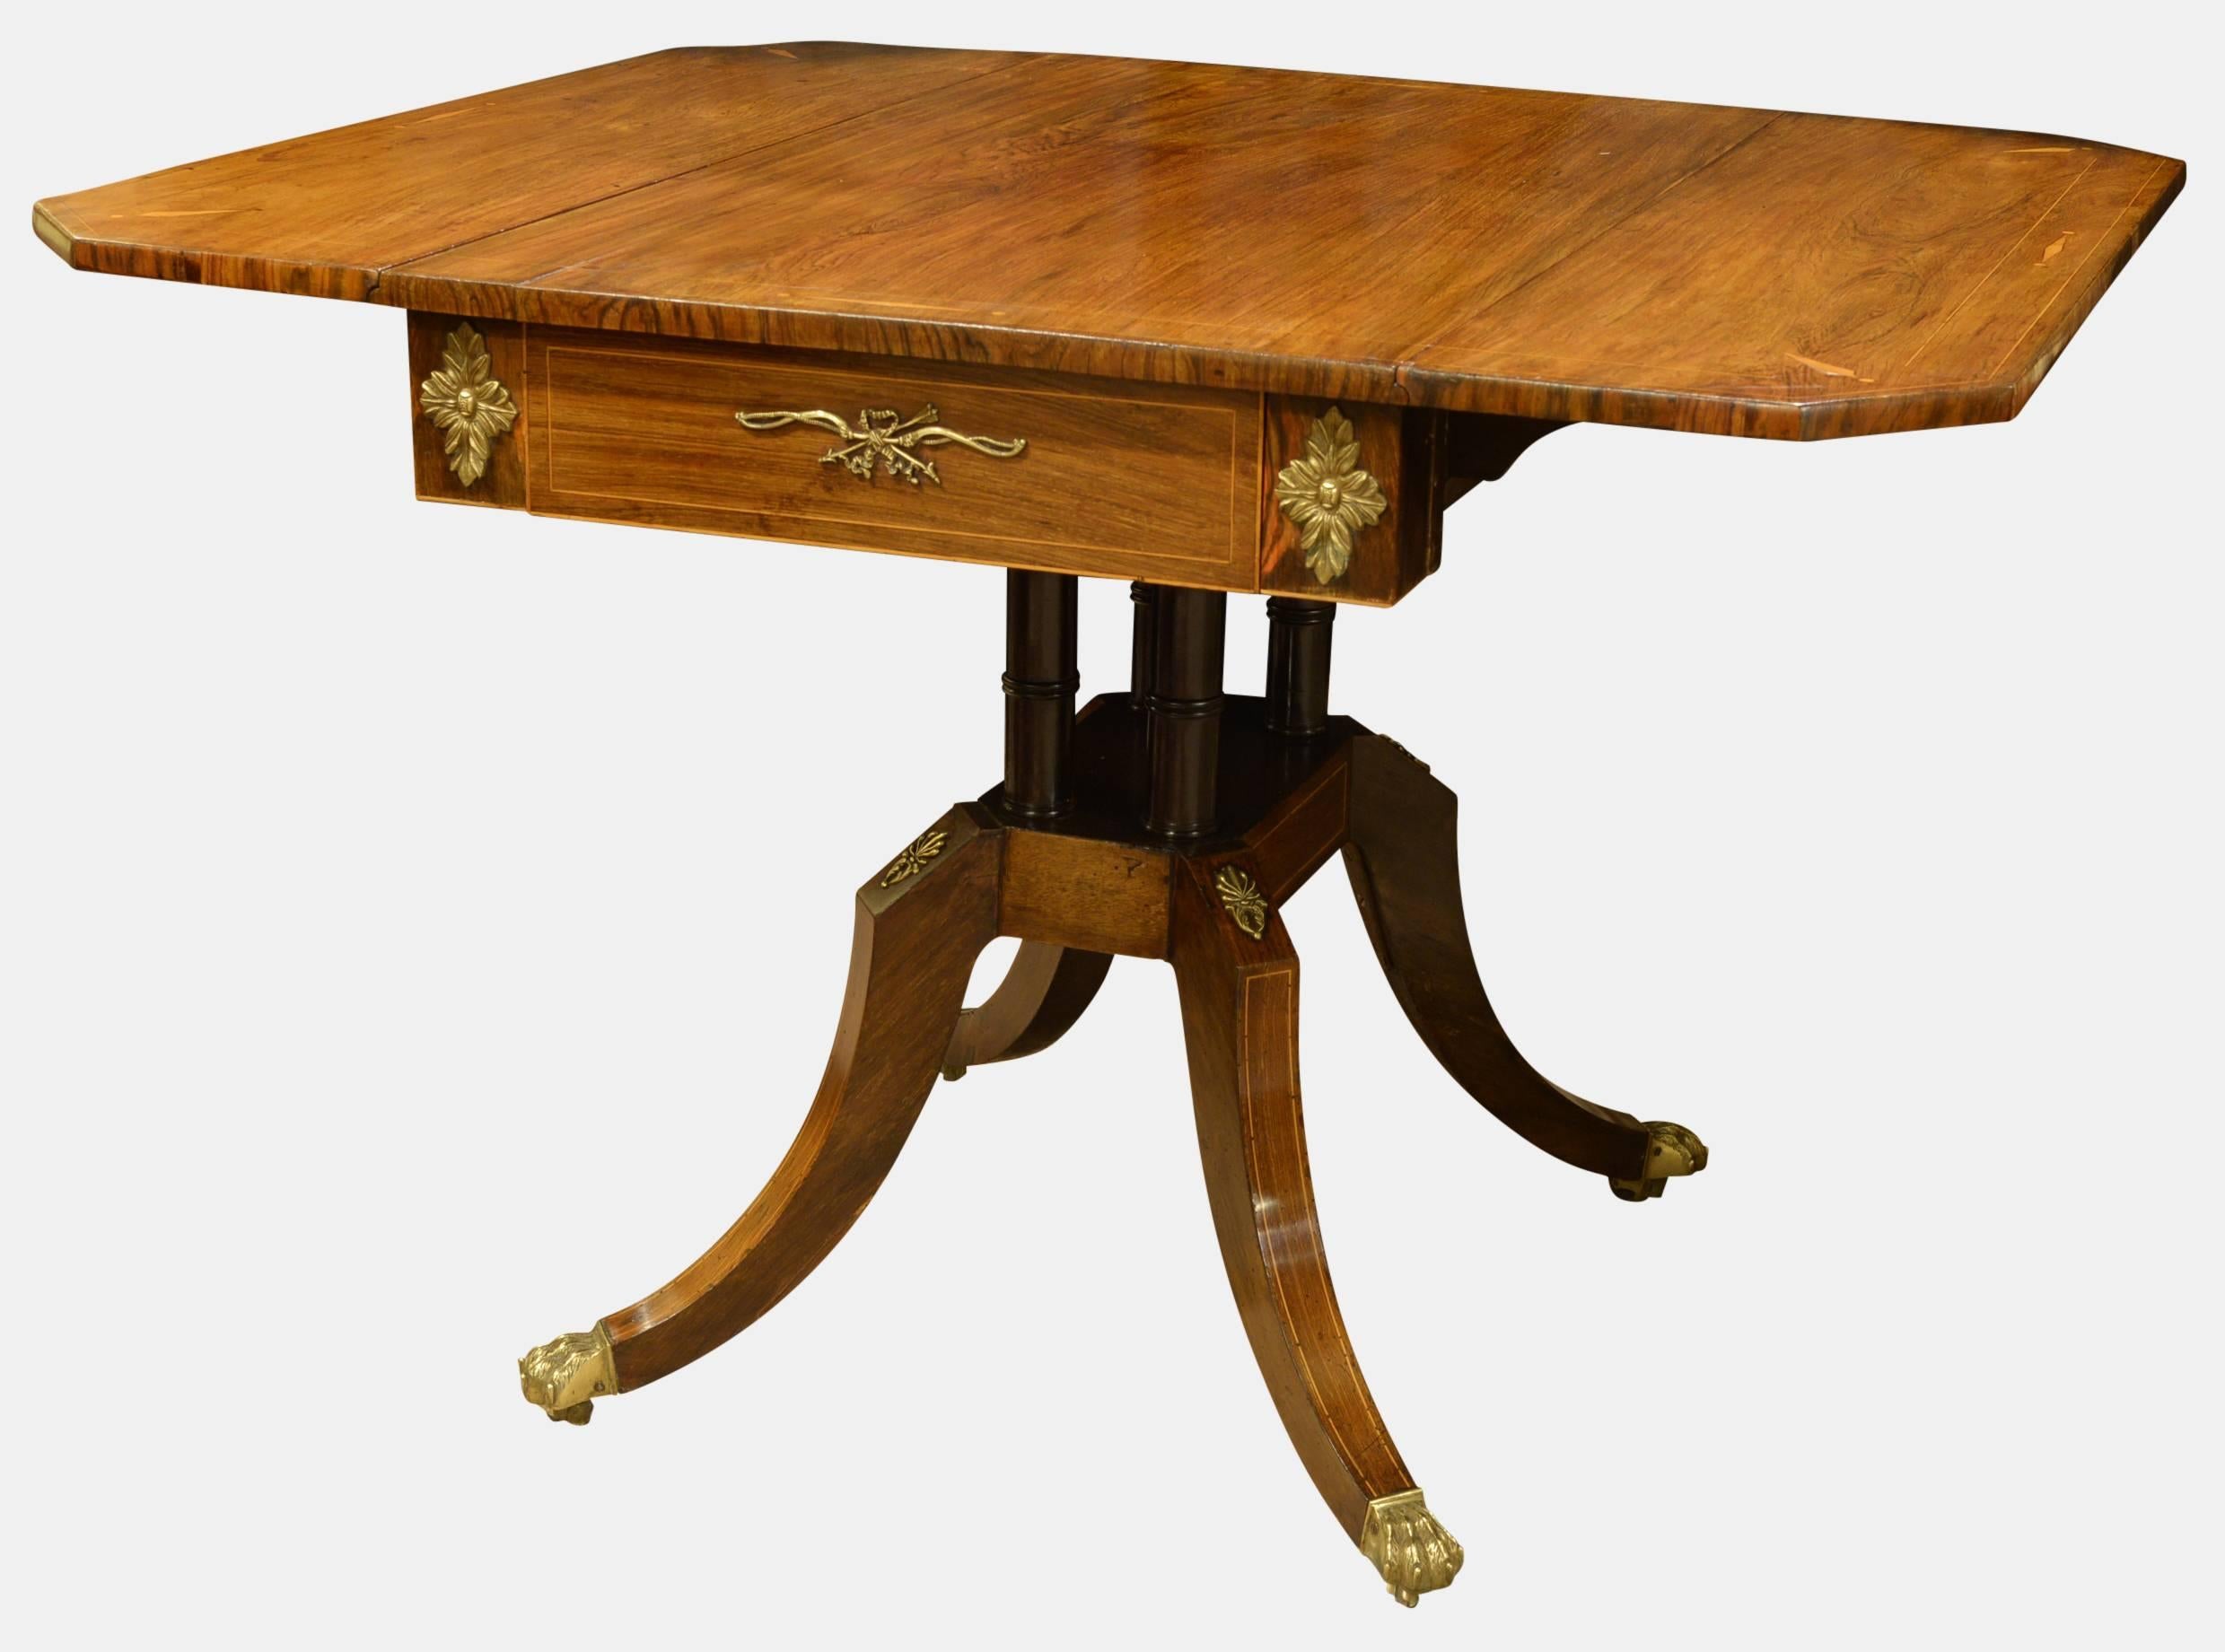 A Regency rosewood drop-leaf supper table with stainwood banding and ormolu mounts on splayed legs,

circa 1820.